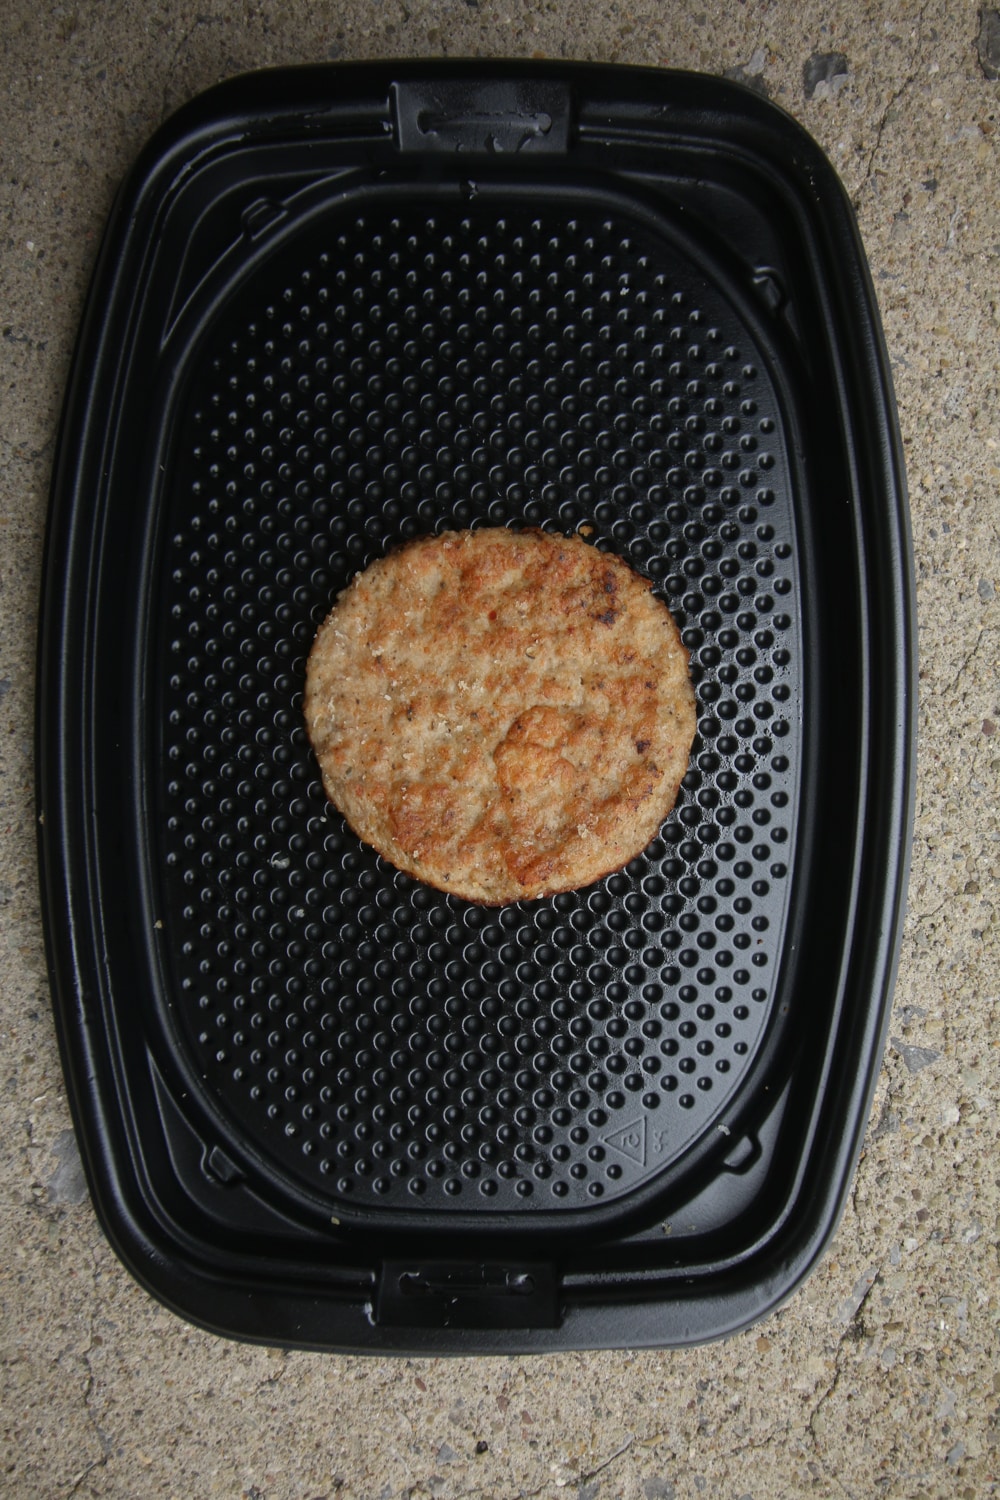 A breakfast sausage patty on a black take-out container.